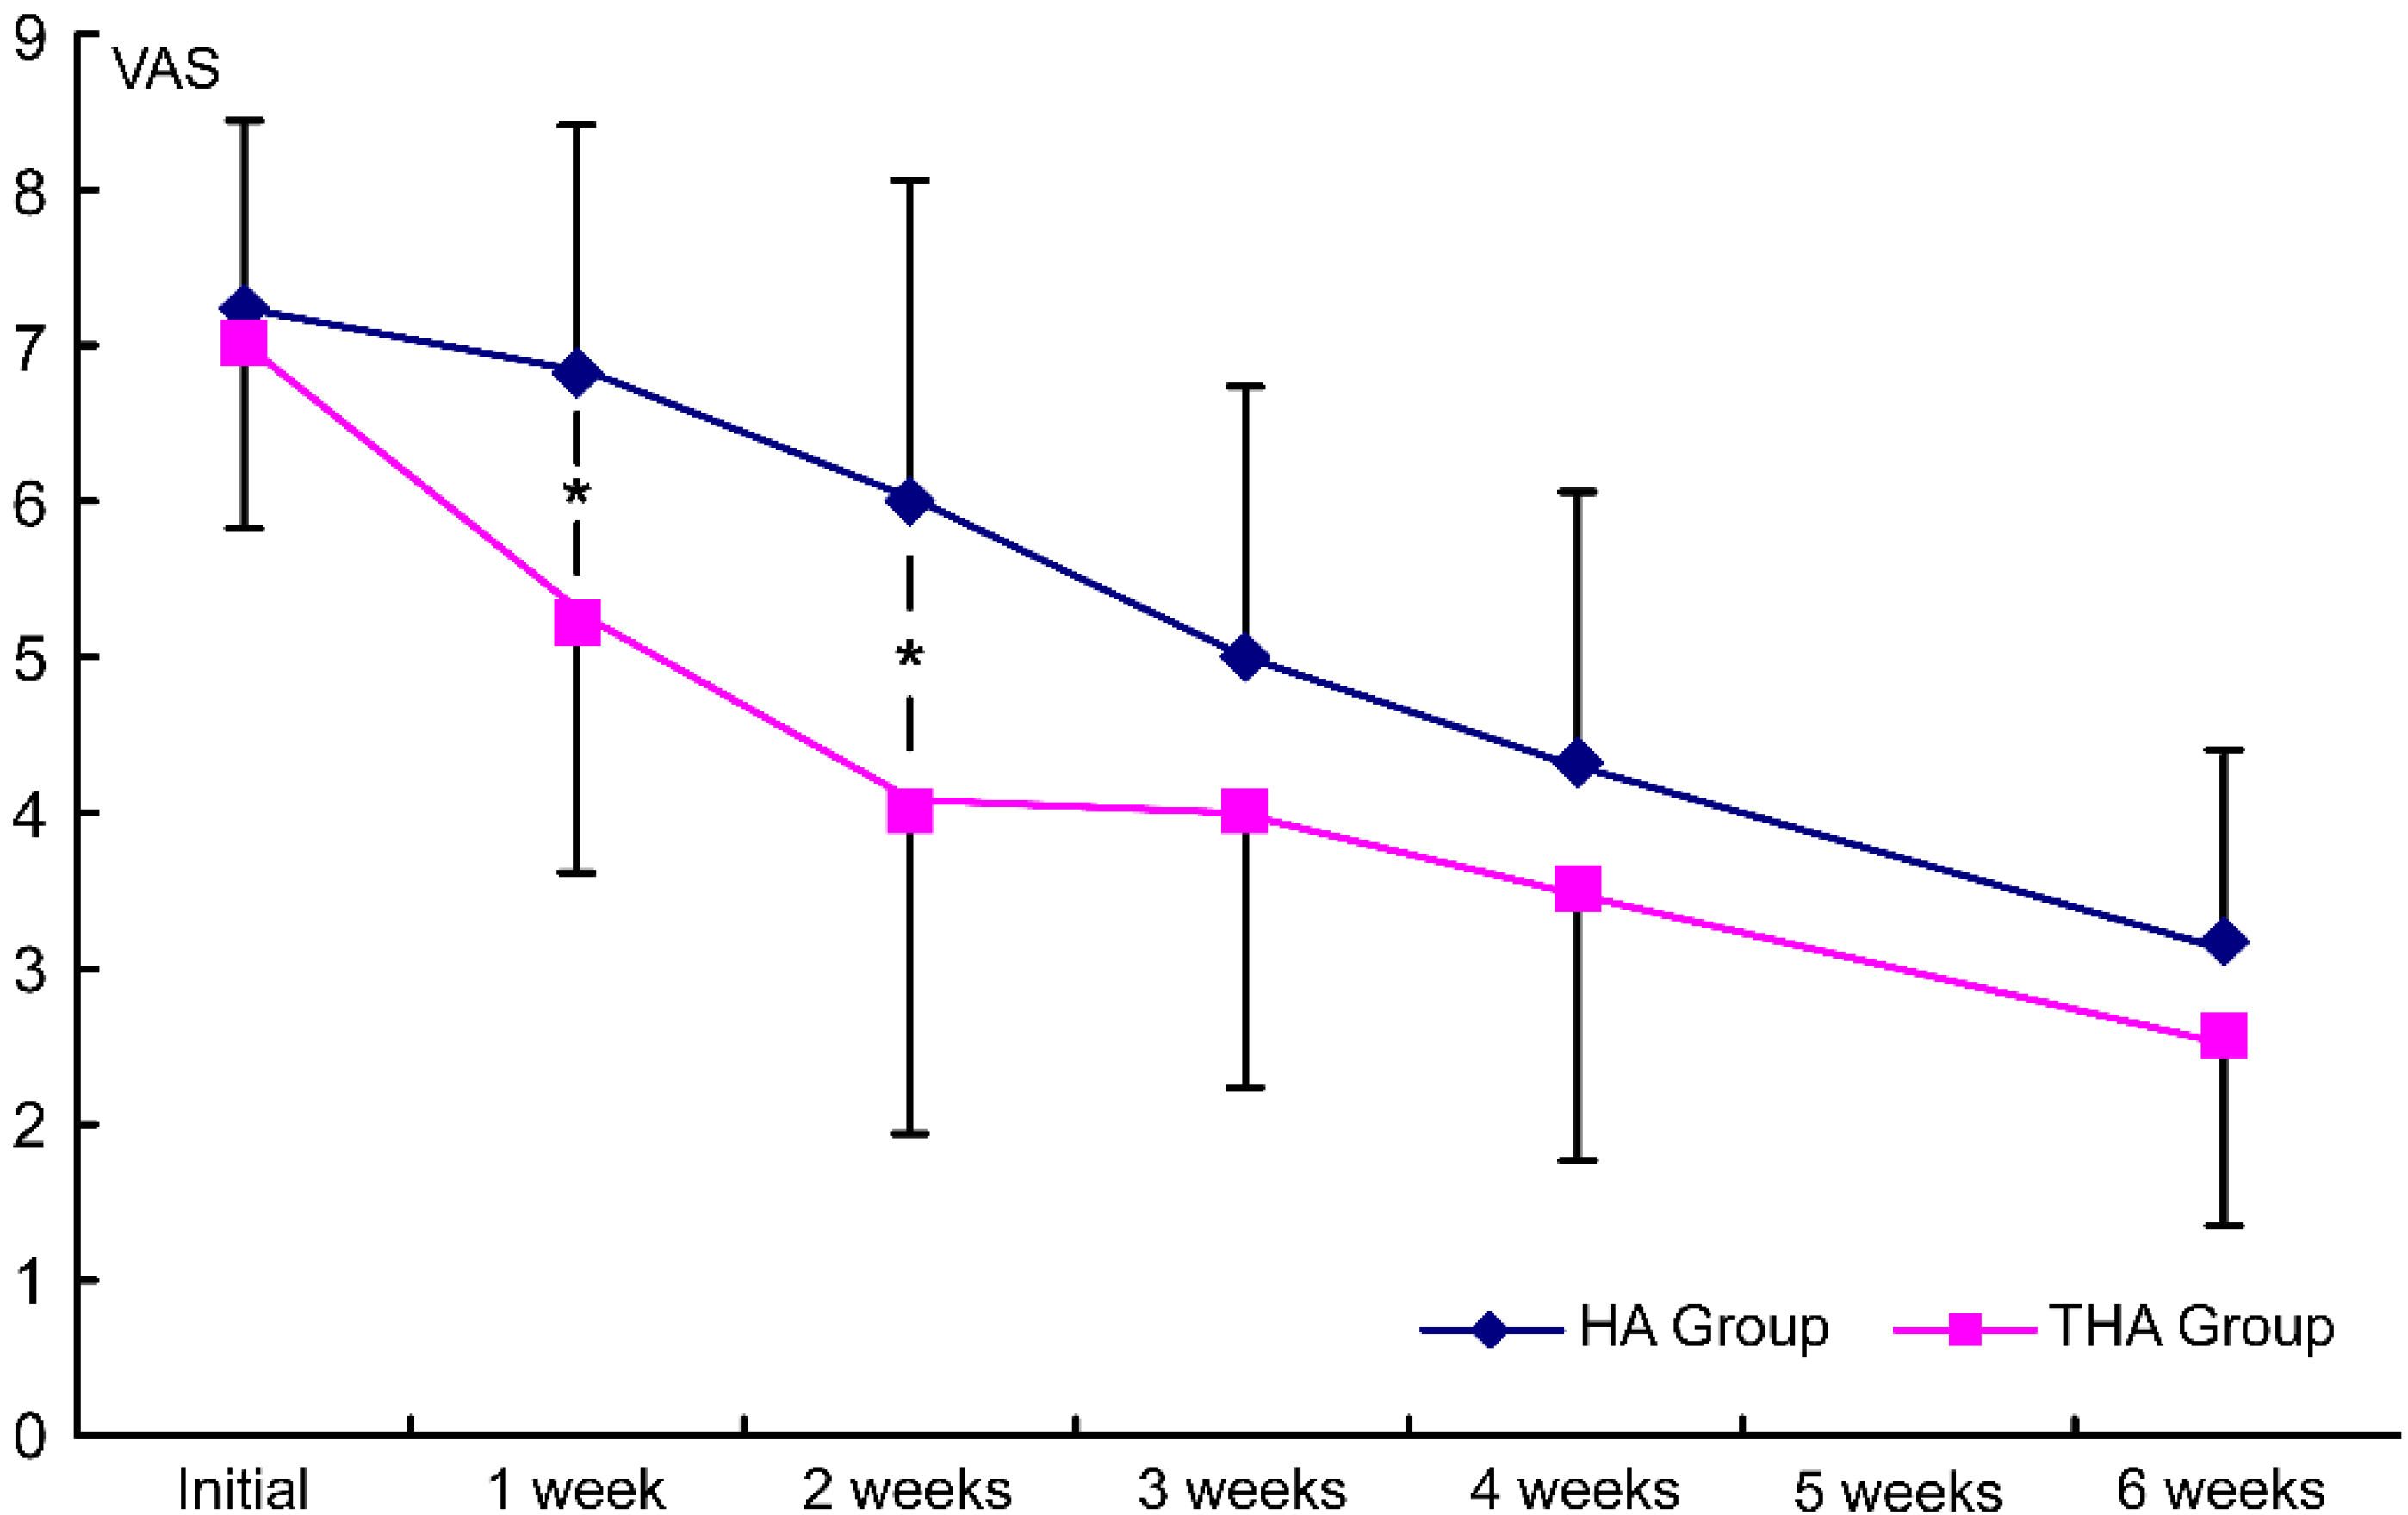 Intergroup comparison of the injection effects on VAS. HA group, hyaluronate group; THA group, hyaluronate plus tramadol group.